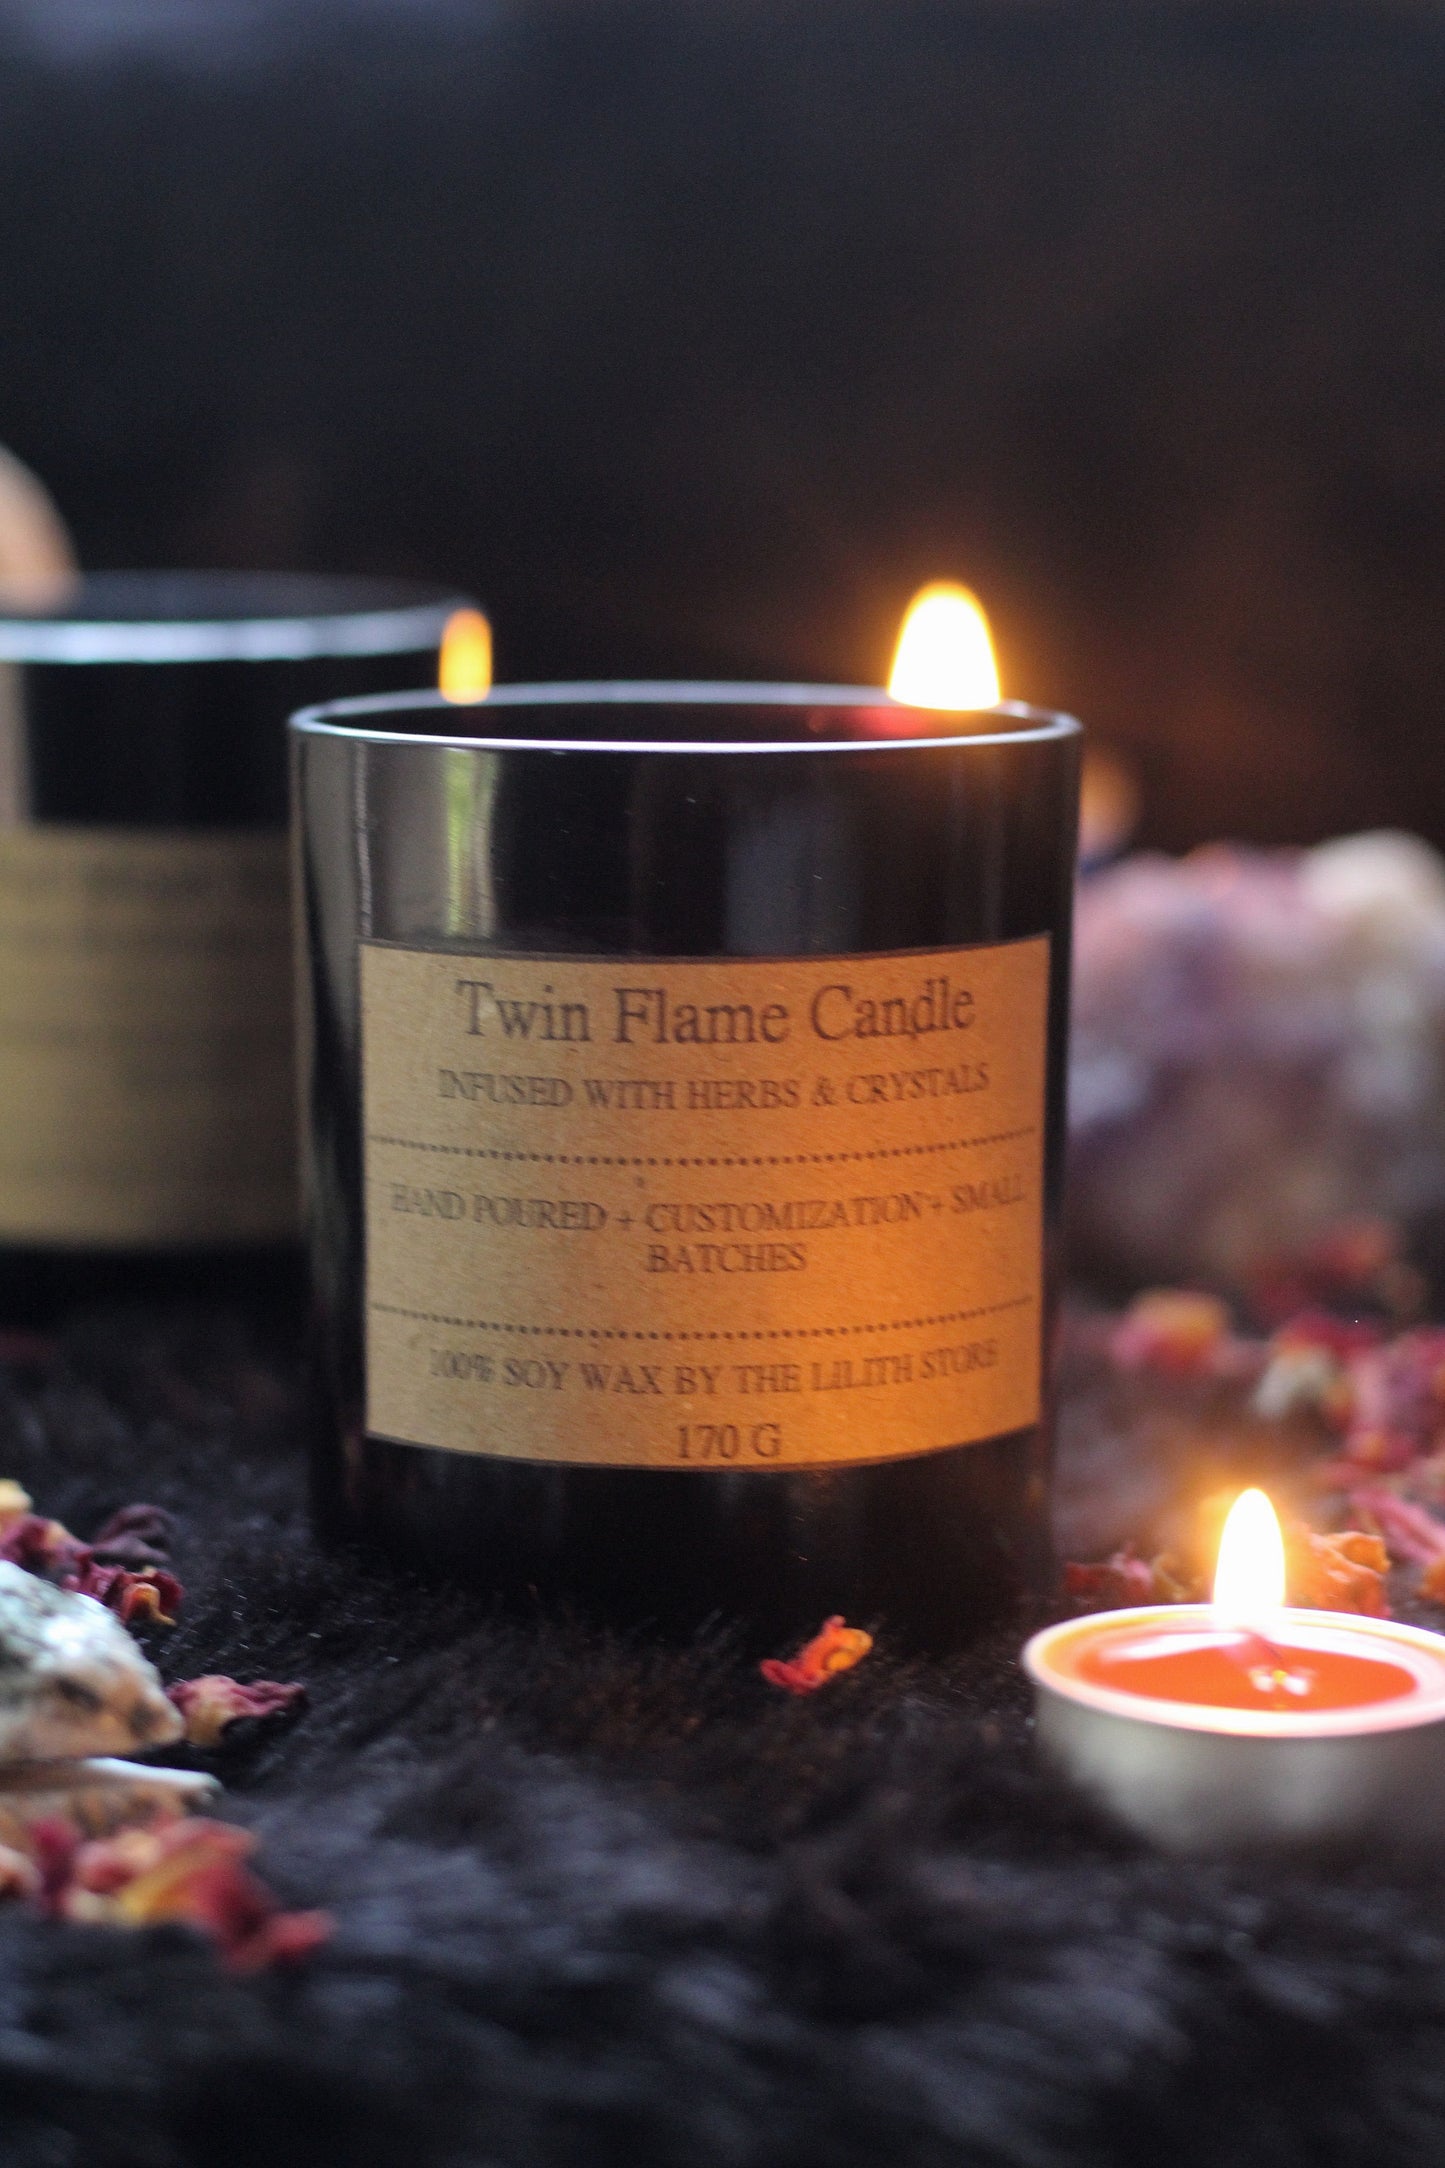 Twin Flame Candle - Soy Wax 170 g